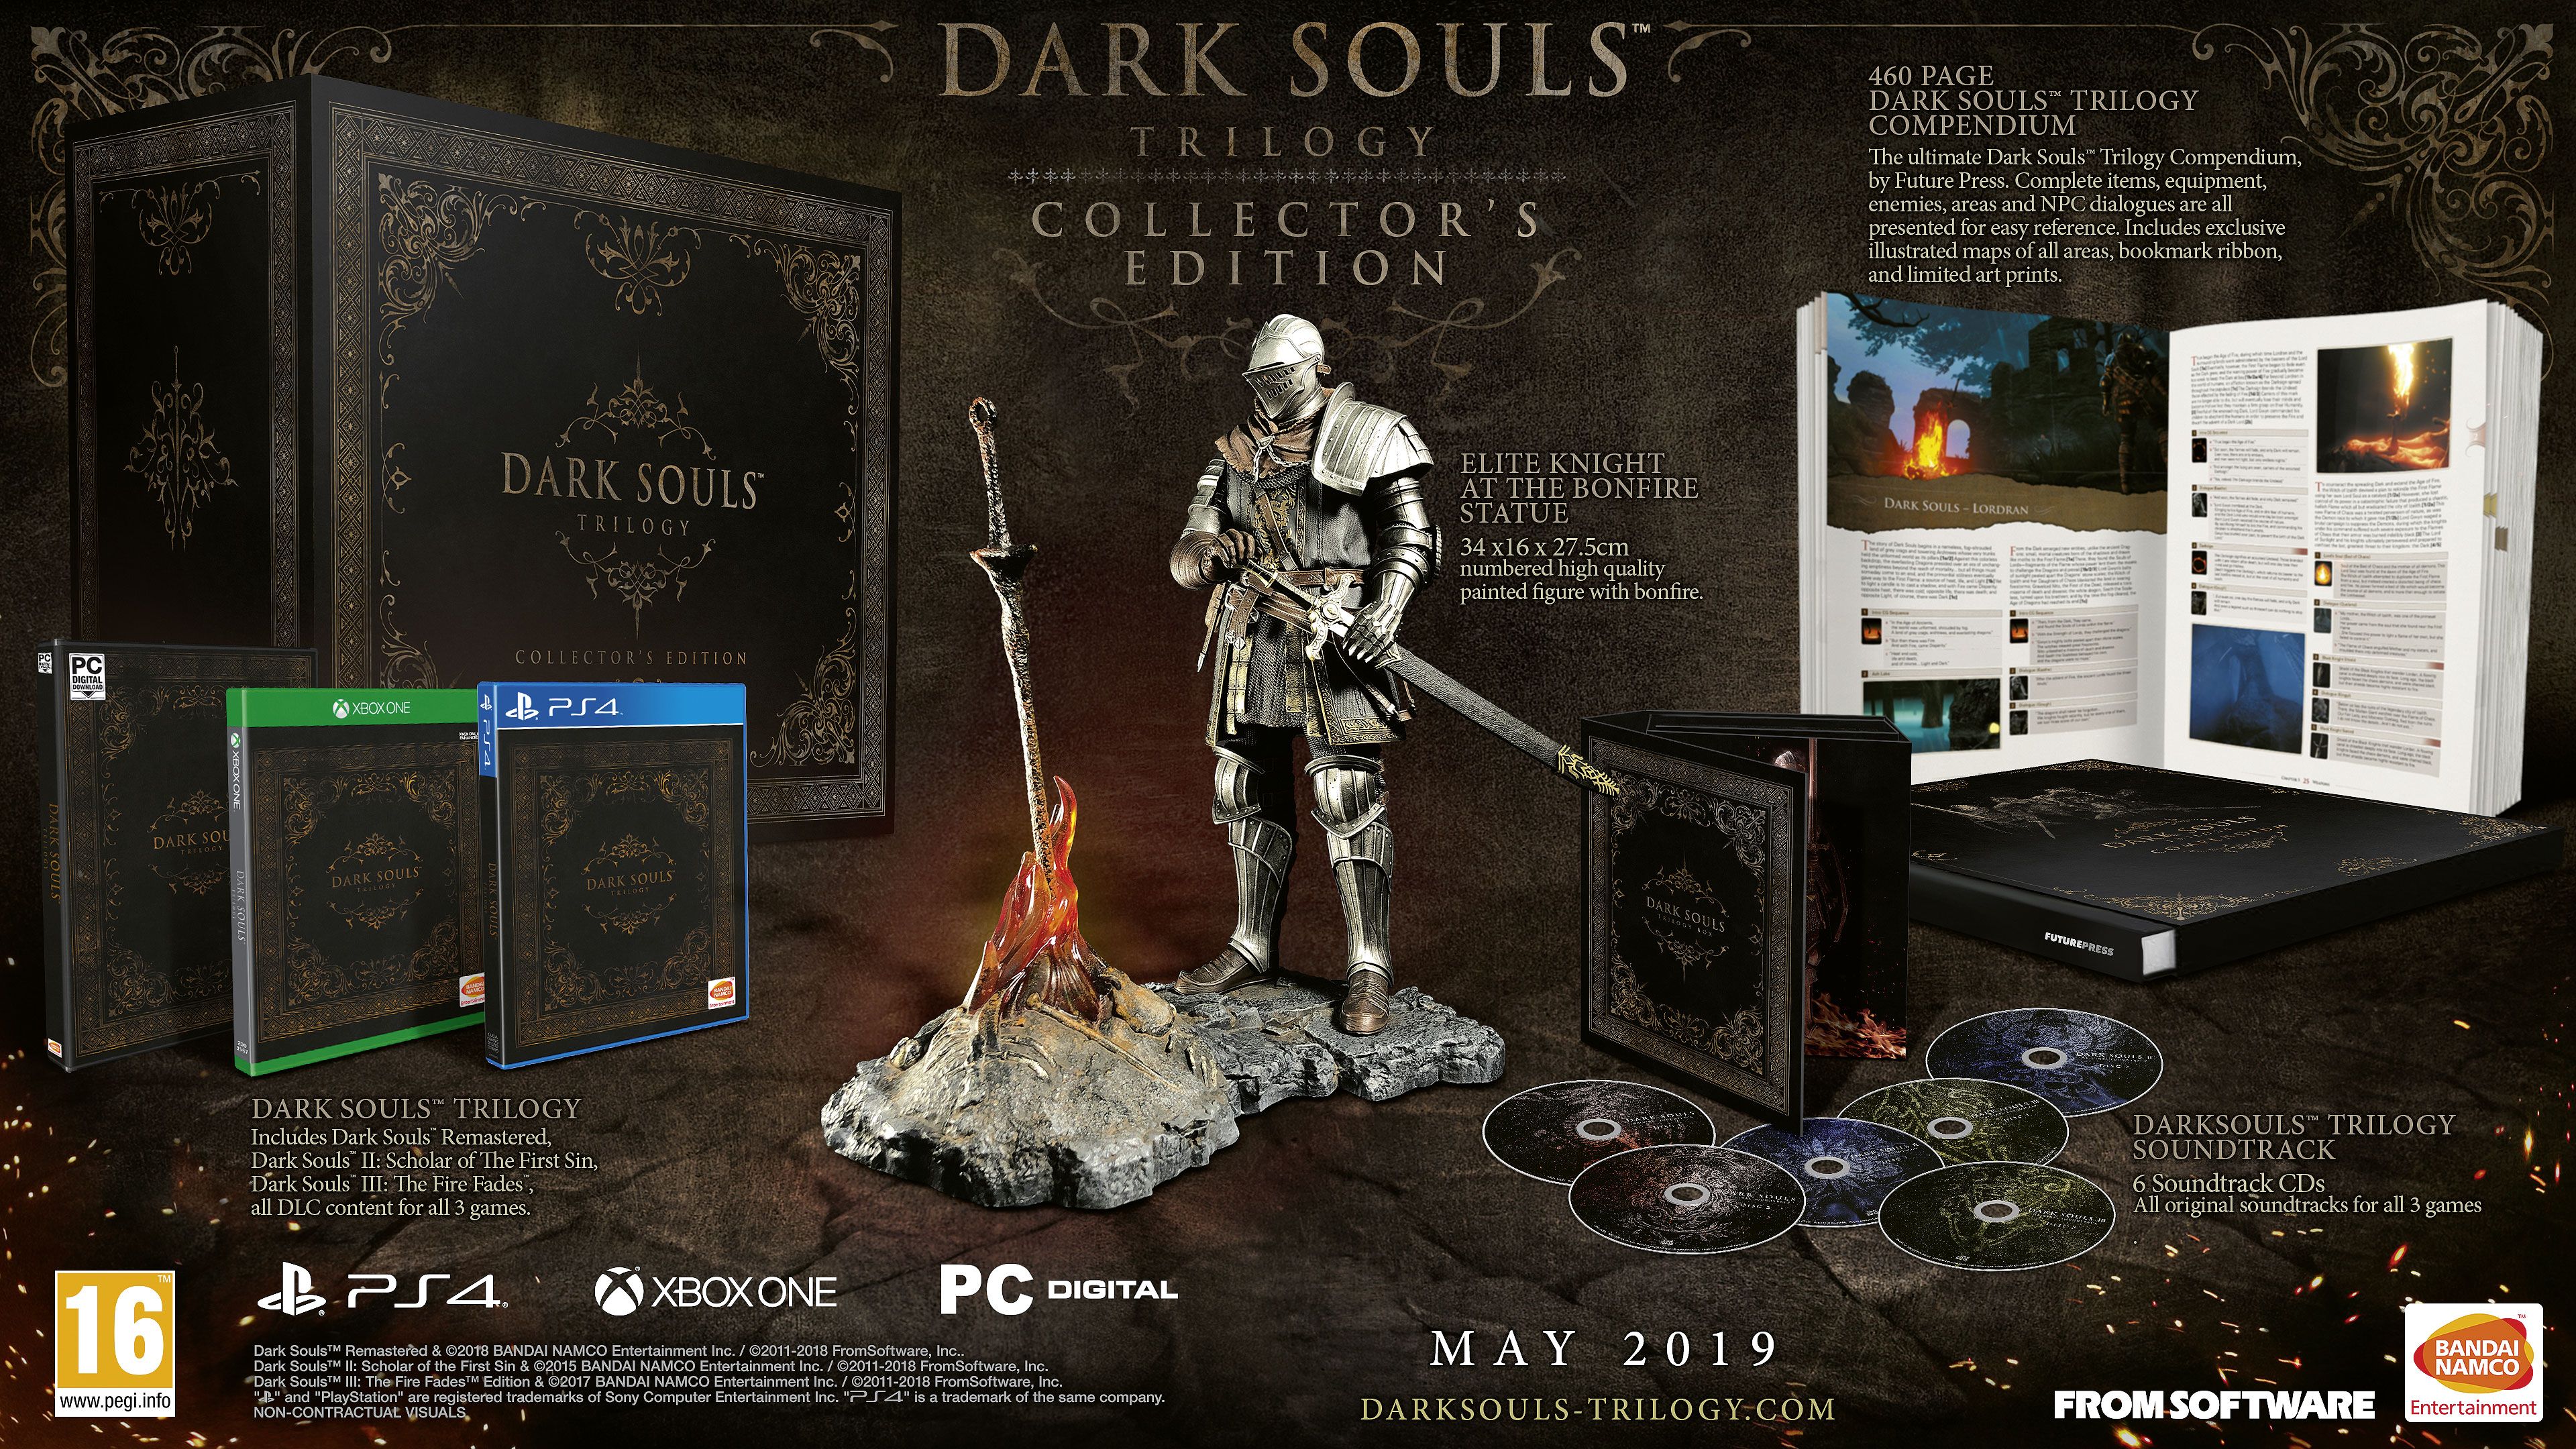 Image for UK folks with £449.99 to spend can pre-order the Dark Souls Trilogy Collector's Edition